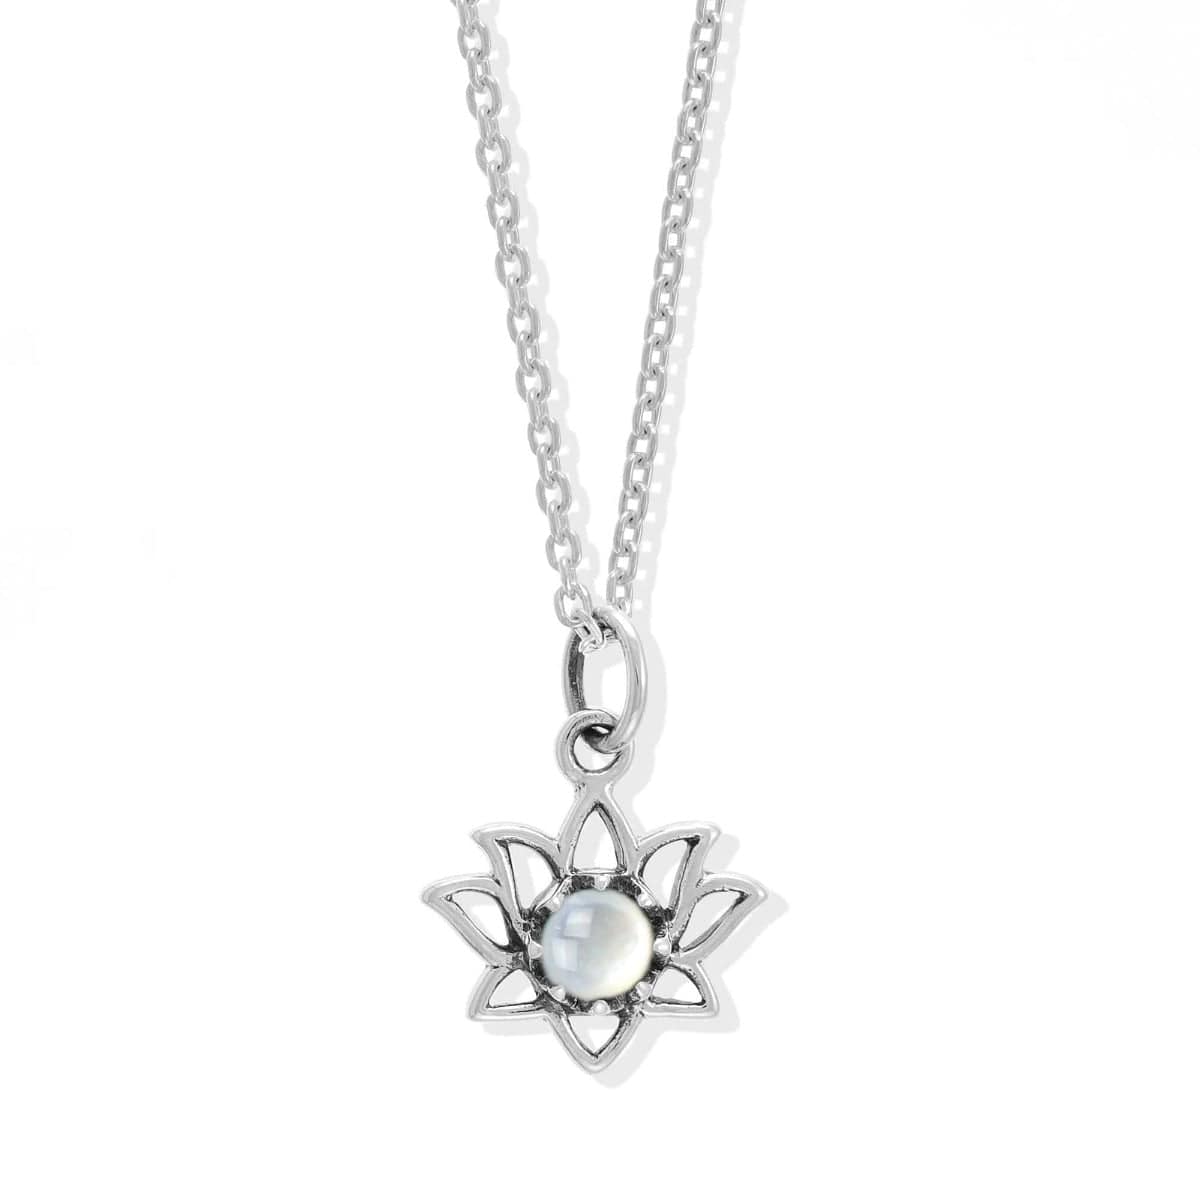 Boma Jewelry Necklaces Sterling Silver with Mother of pearl Lotus Necklace with Stone Pendant